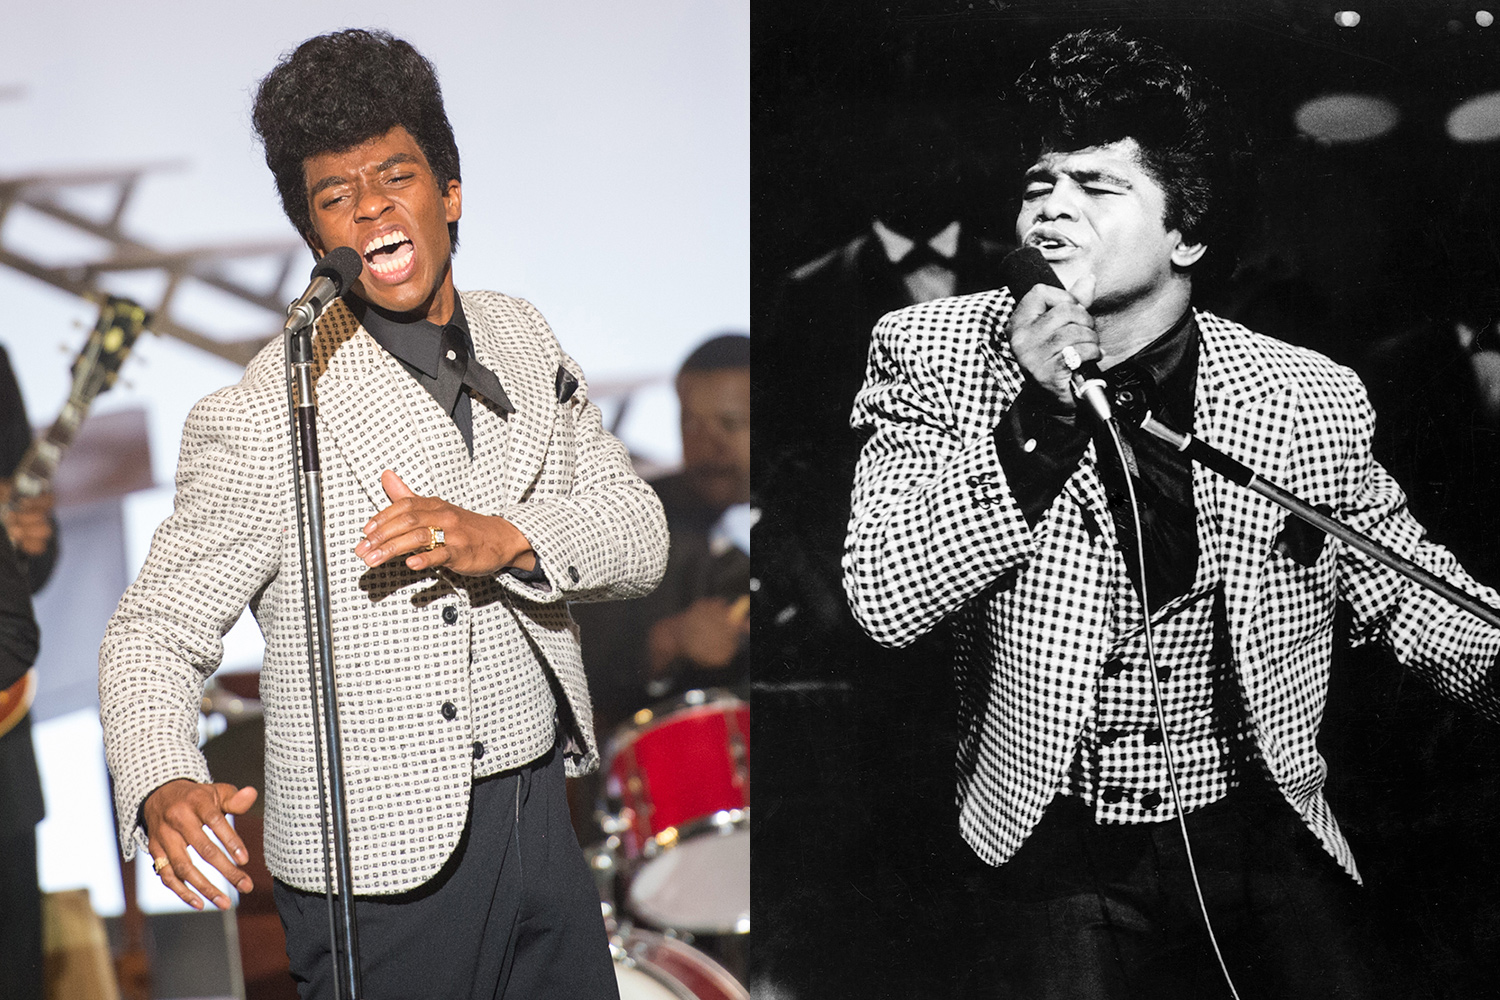 Chadwick Boseman plays James Brown in Get On Up.